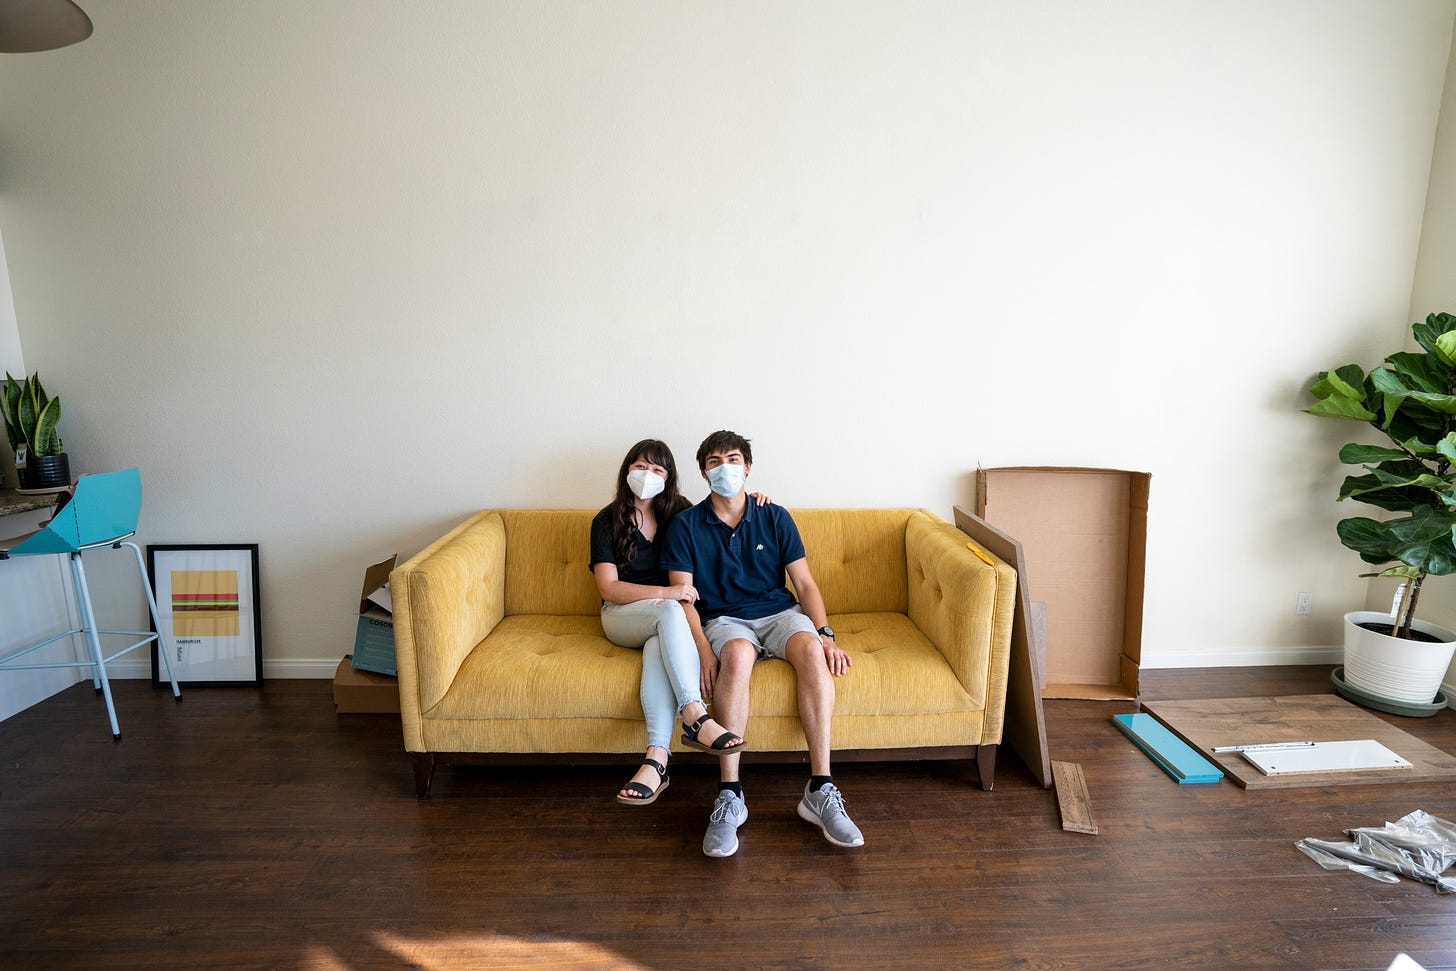 A couple in masks sit on a couch in the middle of a cluttered living room.